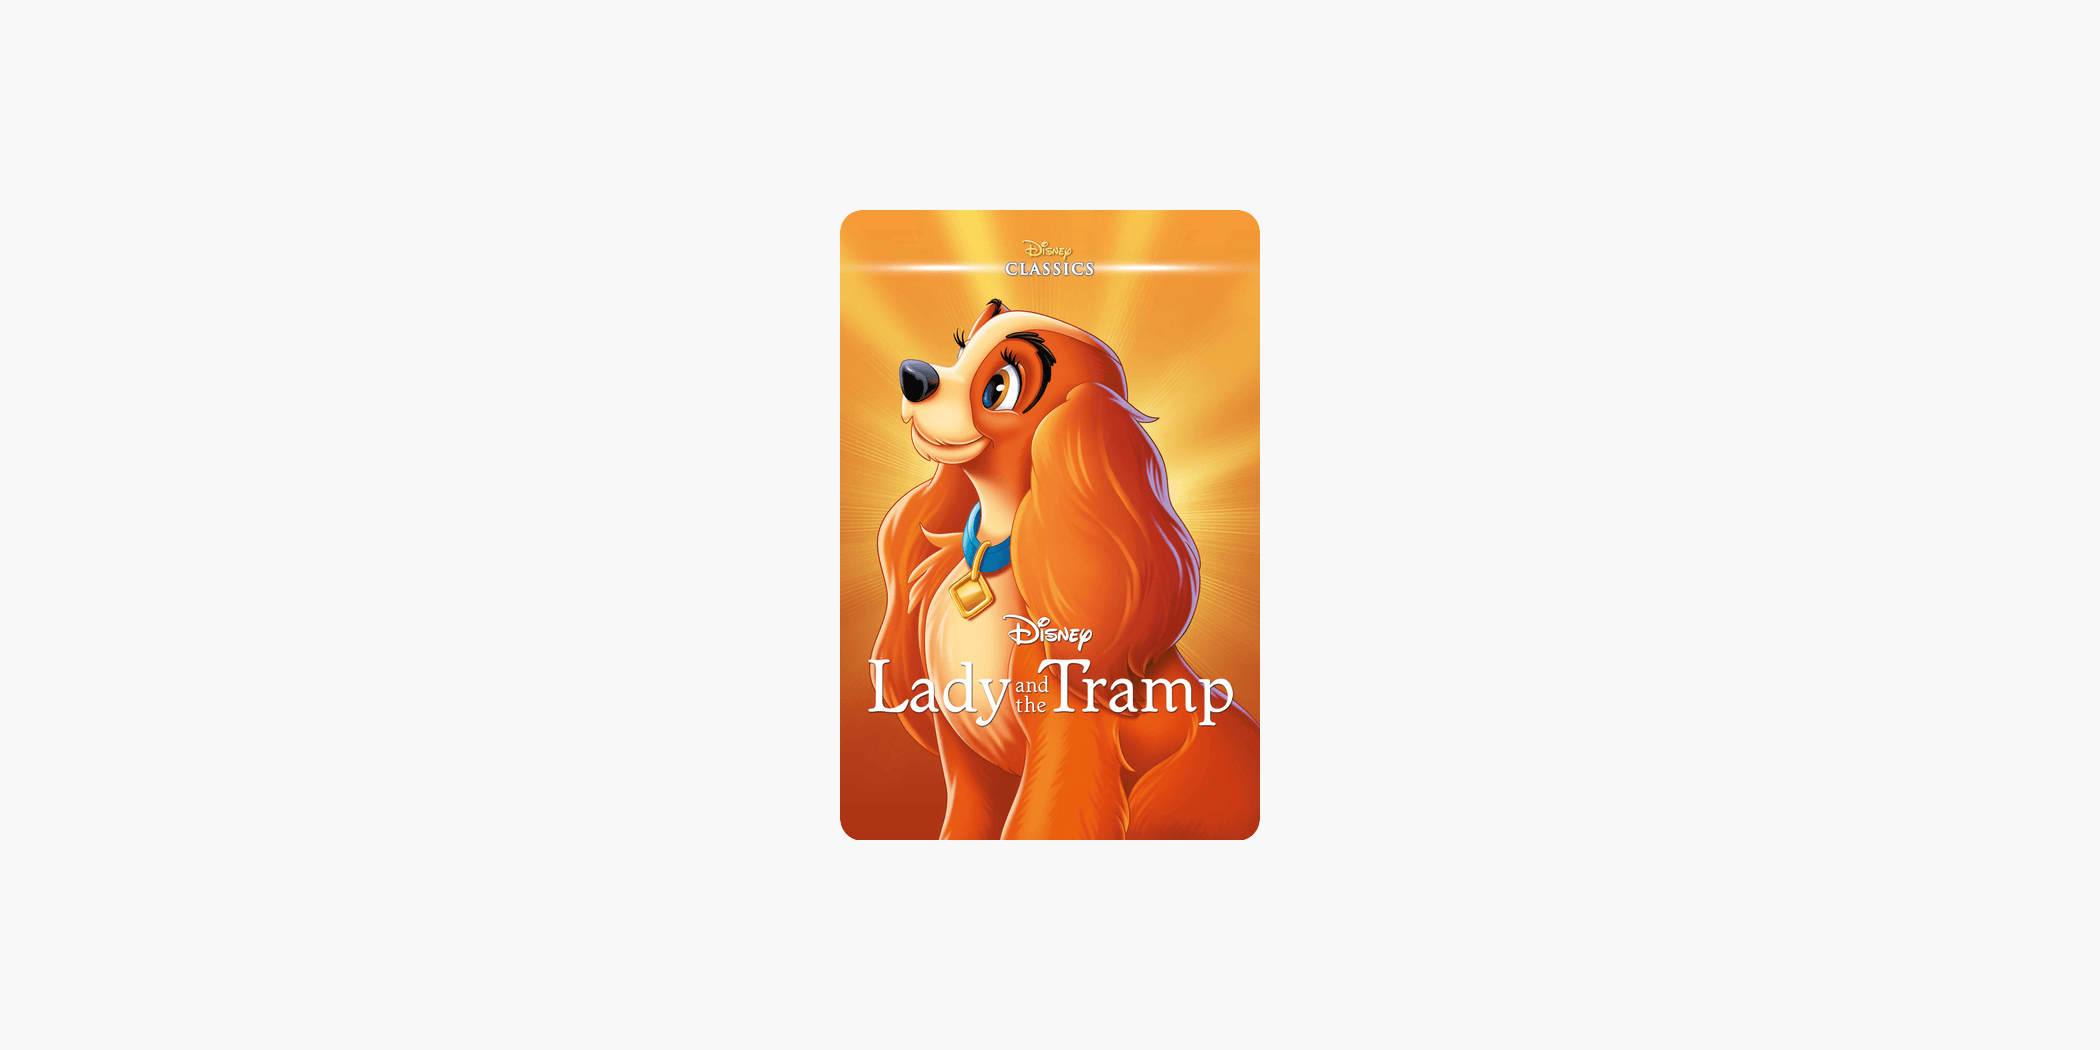 Lady and the Tramp Logo - Lady and the Tramp on iTunes